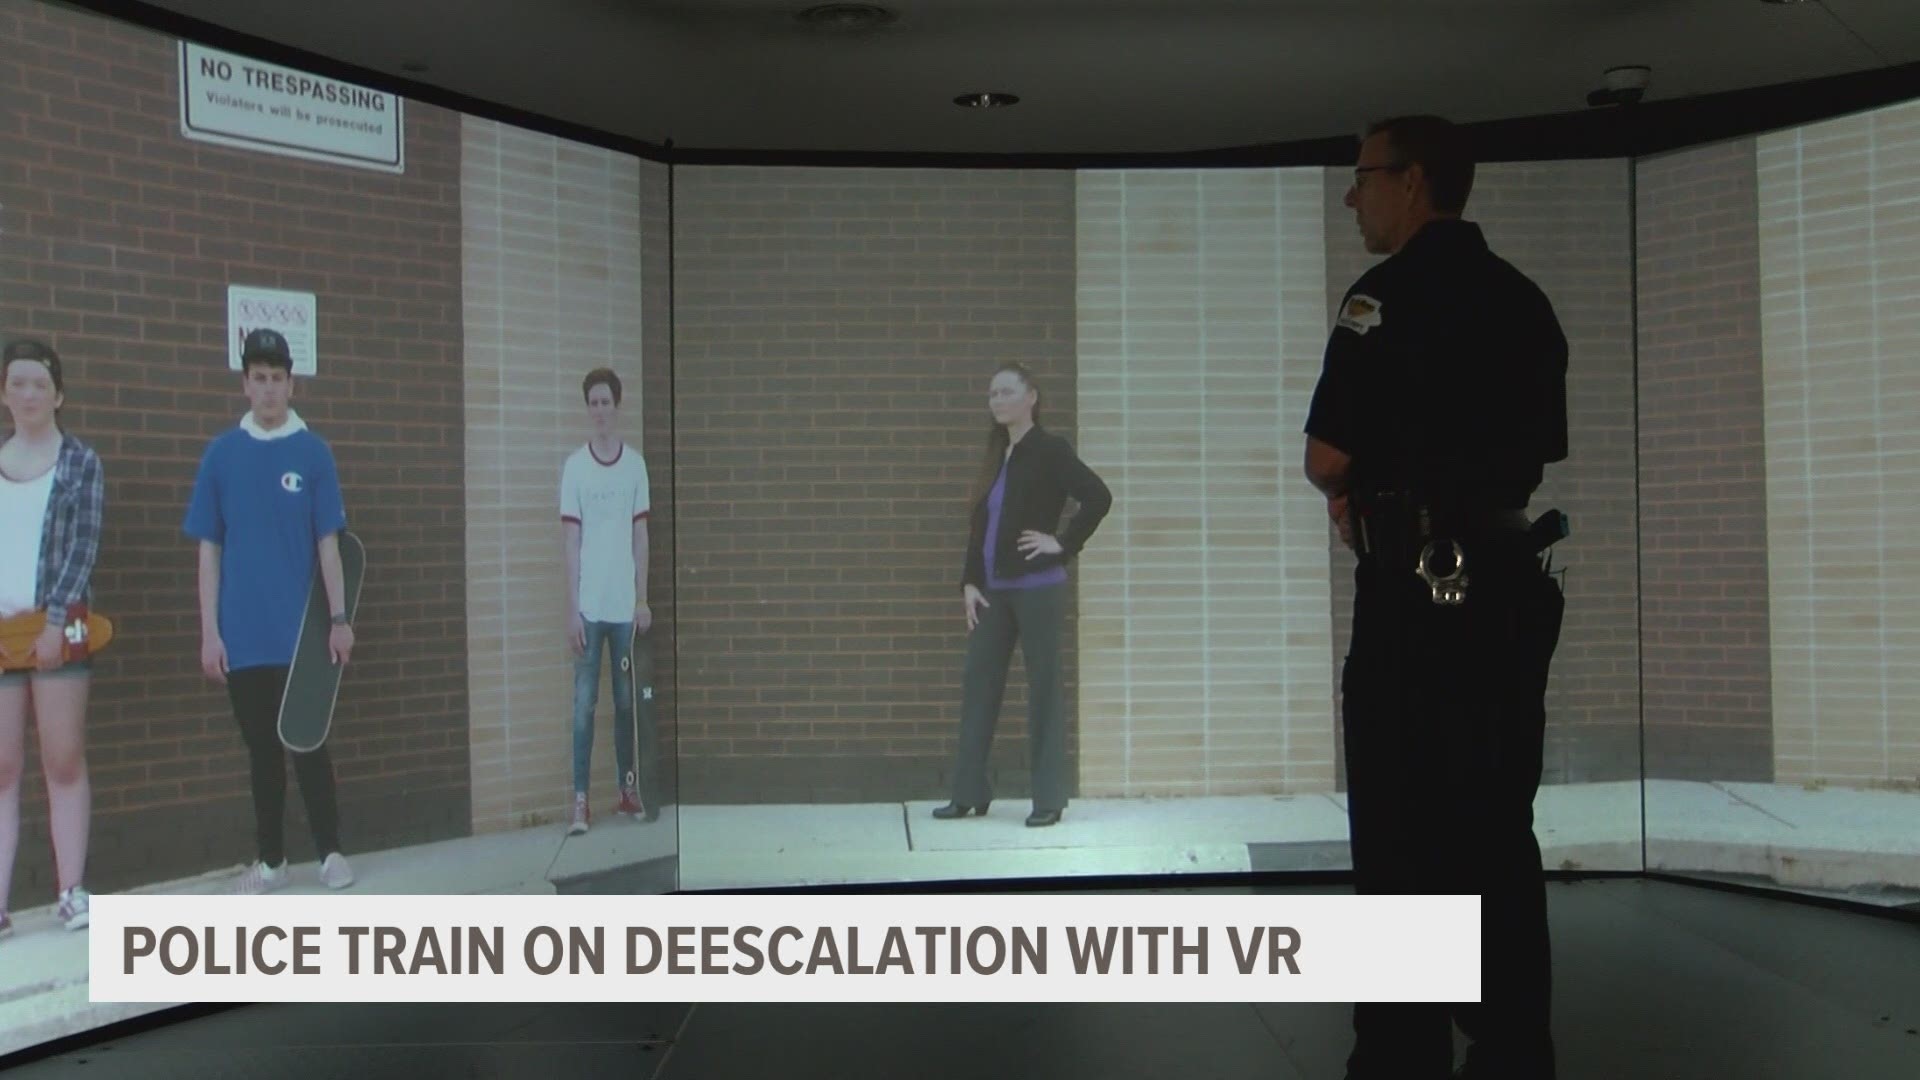 The West Des Moines Police Department uses a virtual reality simulator to help train de-escalation tactics with the goal of not using force.